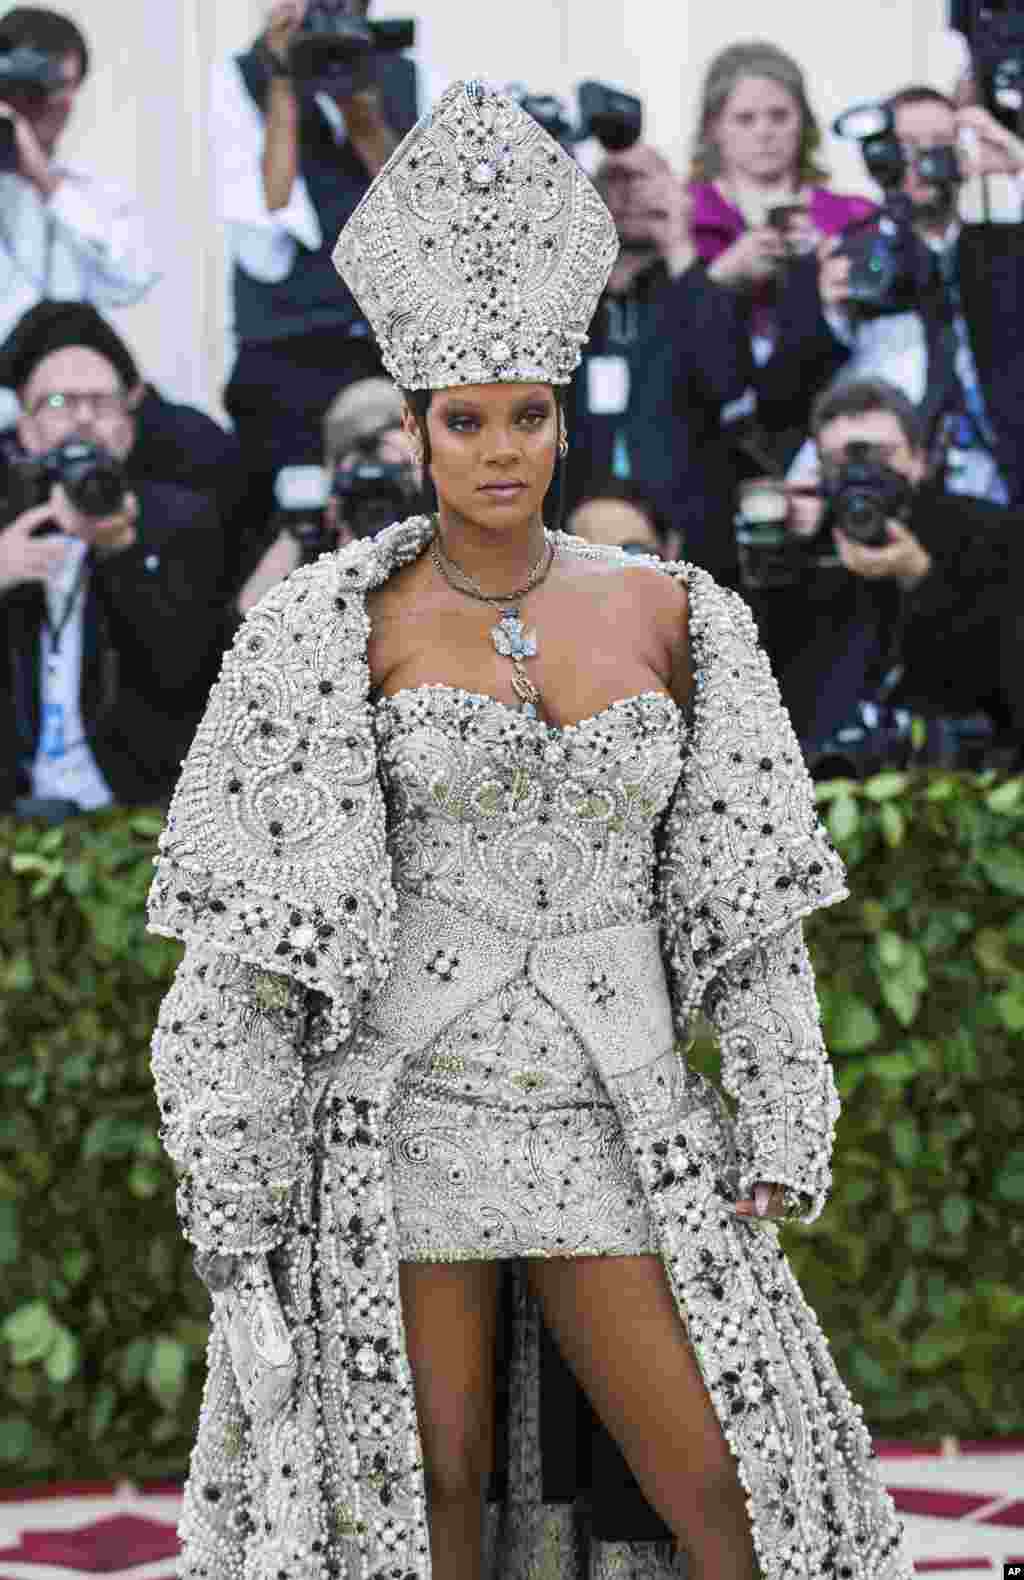 Singer Rihanna attends The Metropolitan Museum of Art&#39;s Costume Institute benefit gala celebrating the opening of the Heavenly Bodies: Fashion and the Catholic Imagination exhibition on Monday, May 7, 2018, in New York. (Photo by Charles Sykes/Invision/AP)